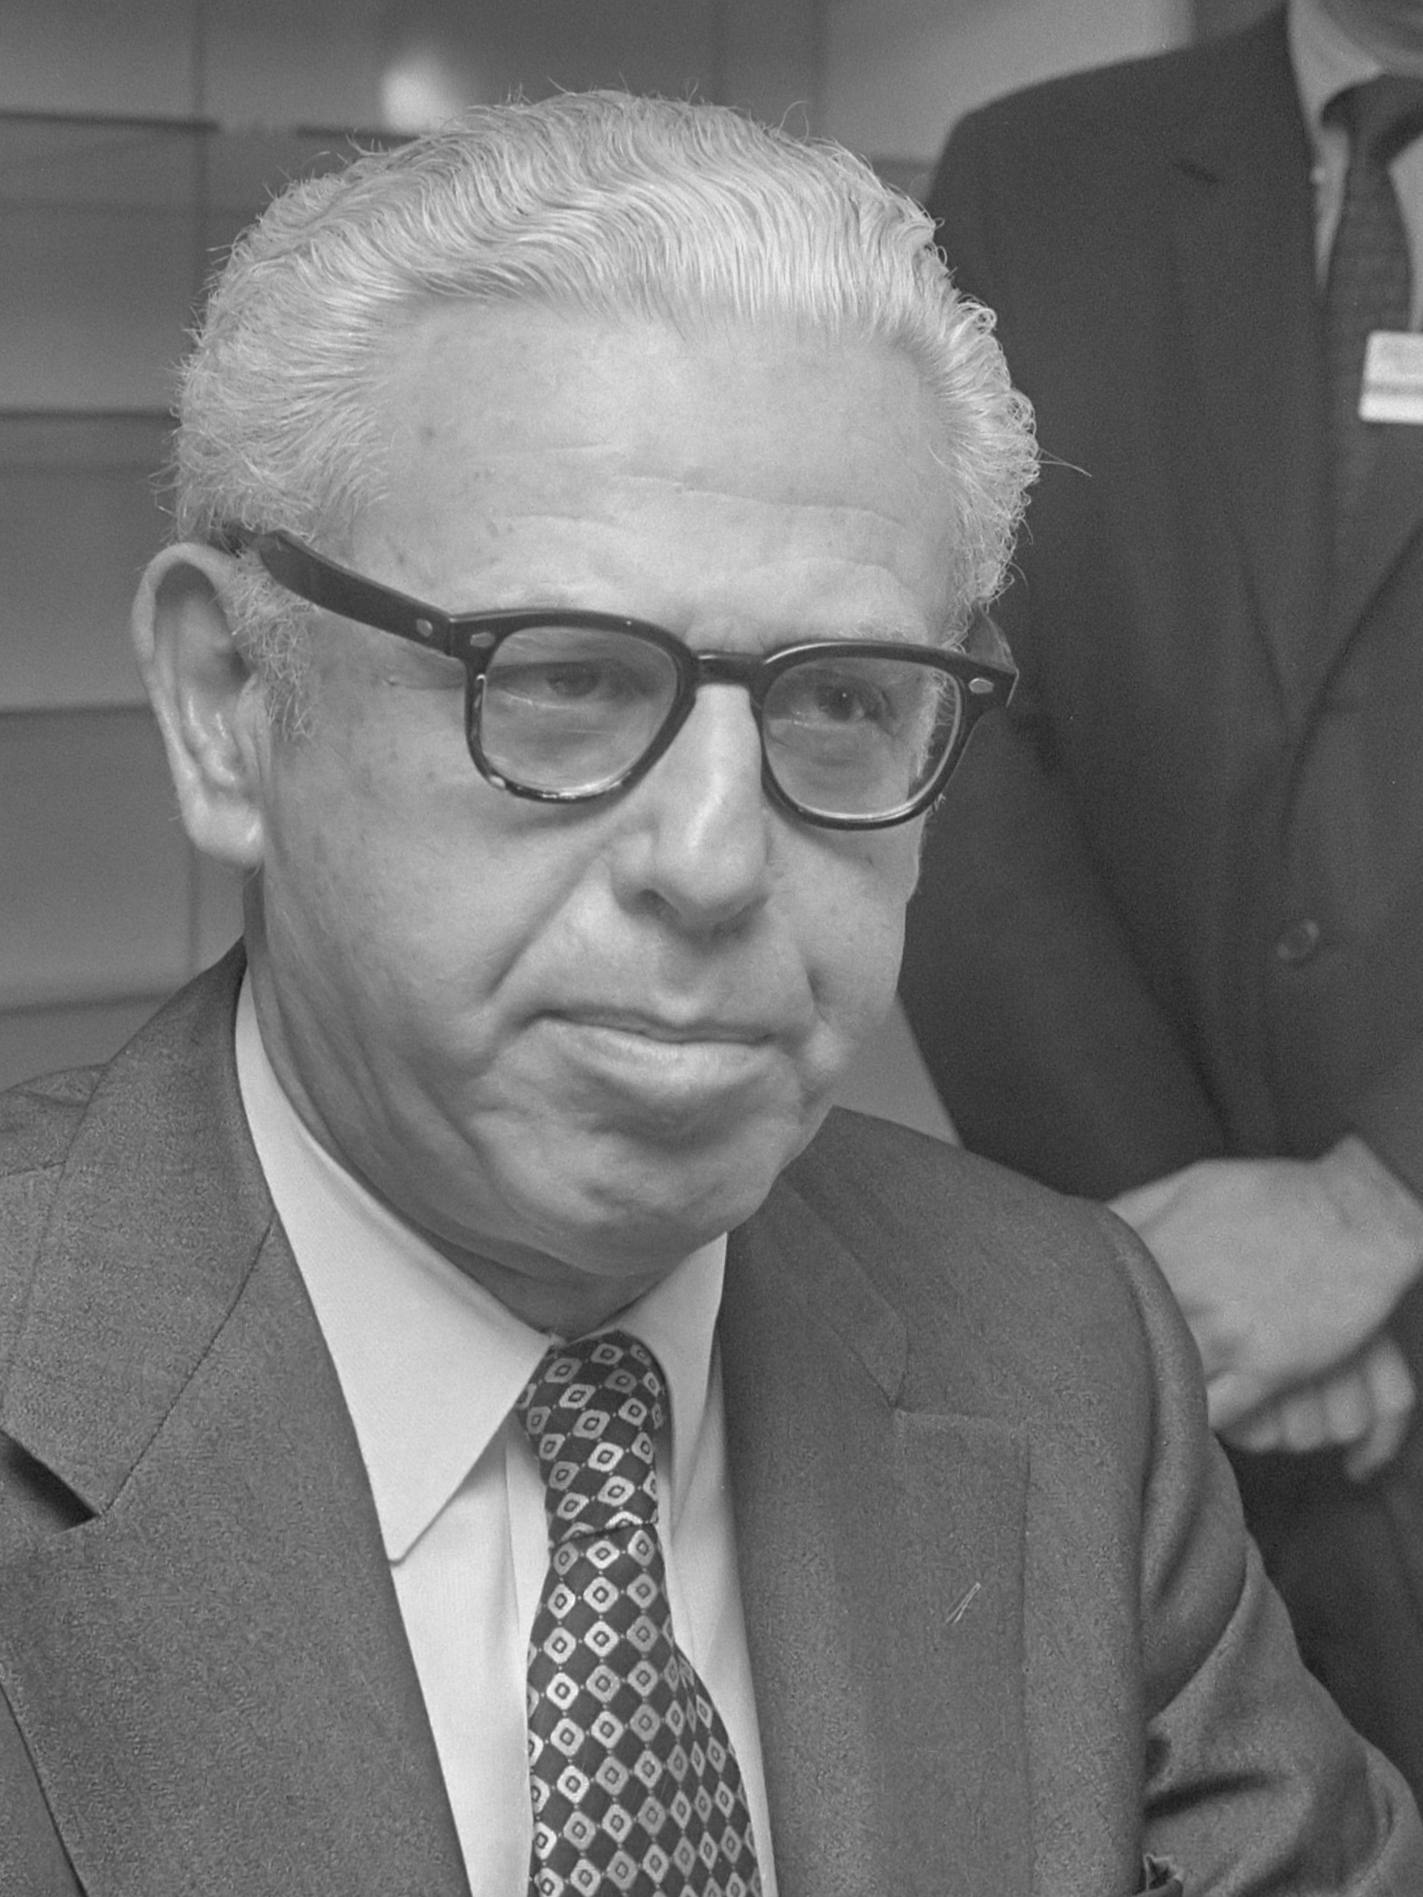 Black-and-white photograph of a man in a suit with glasses.